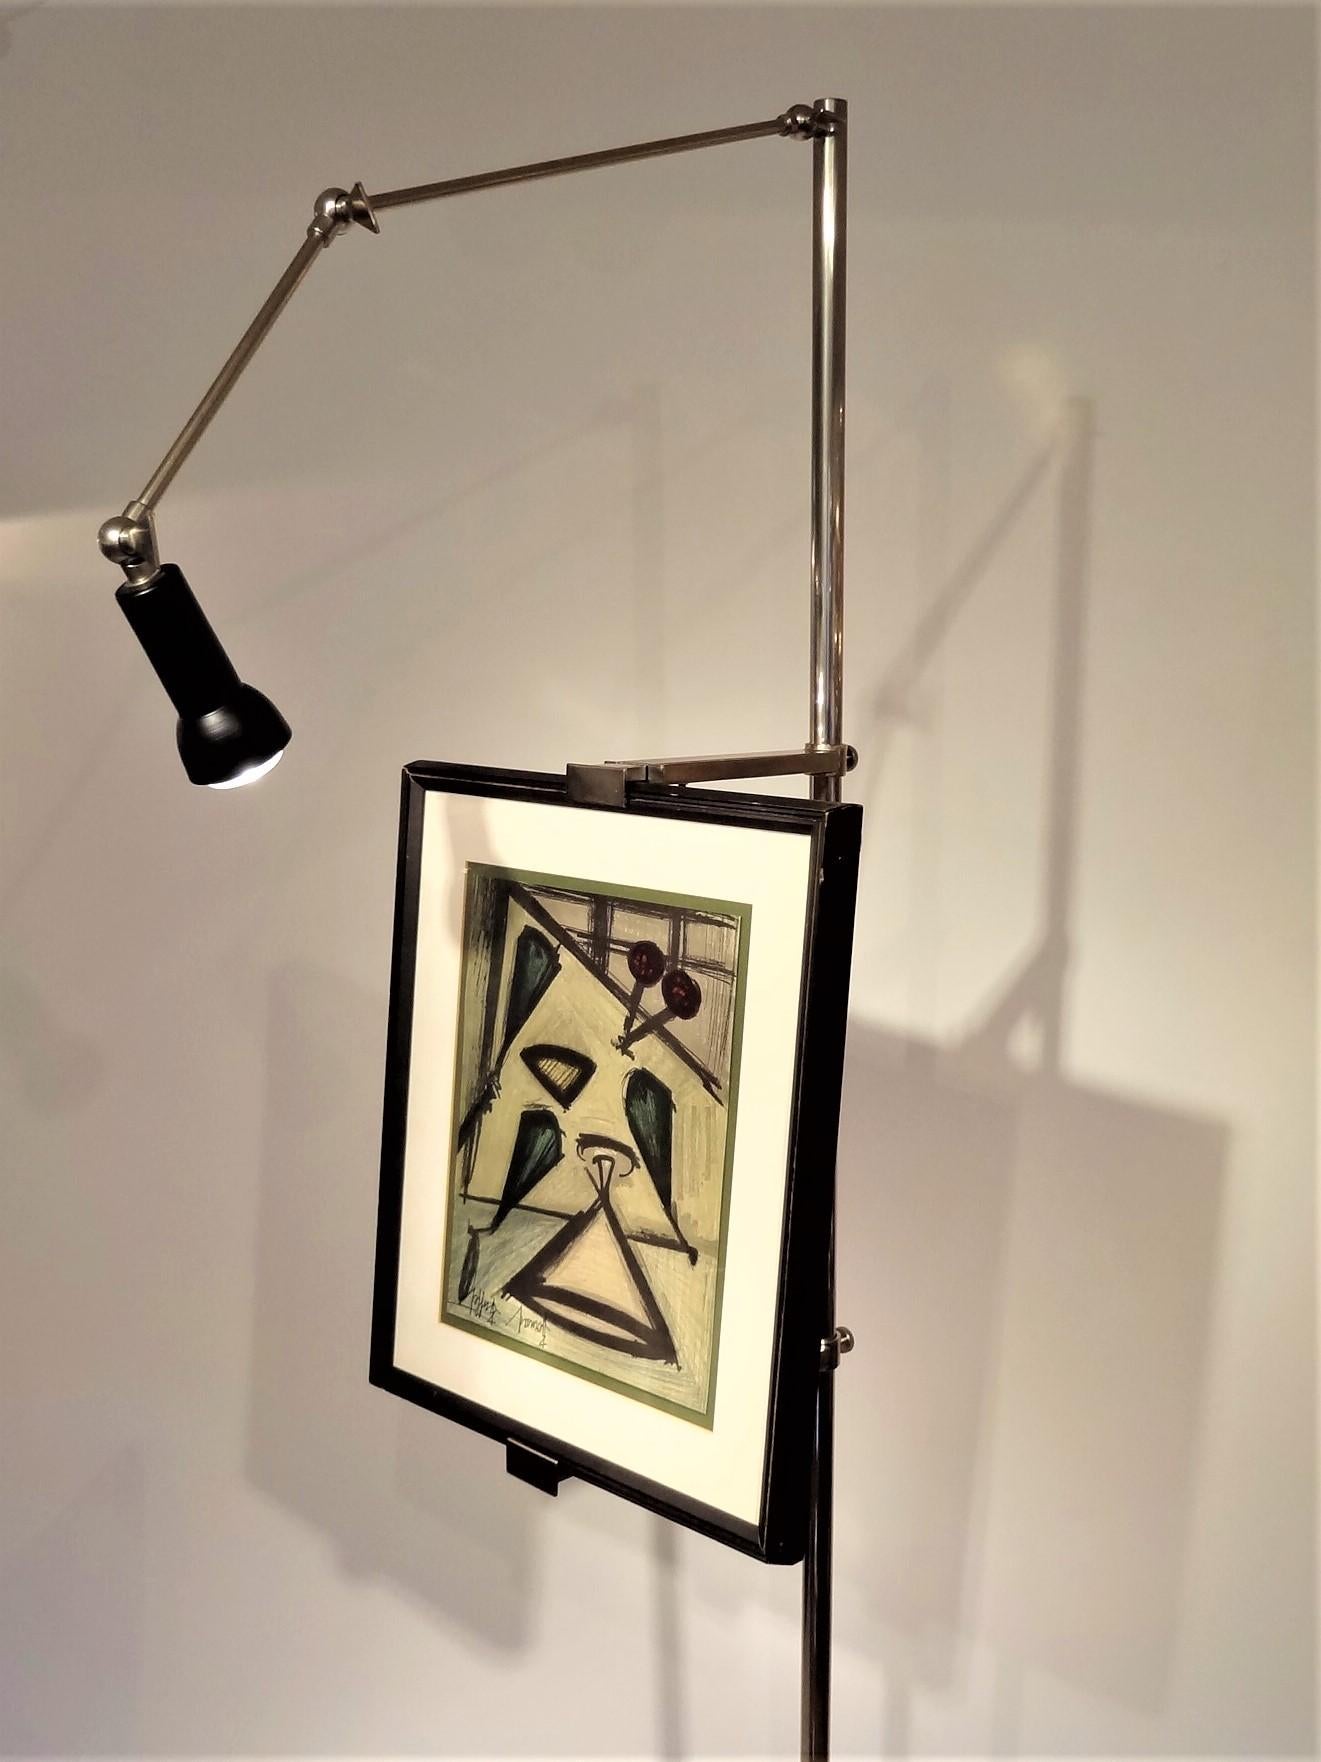 A nickel plated floor standing easel with articulating light and brackets designed by Angelo Lelii for the Italian company Arredoluce, Monza, Italy.